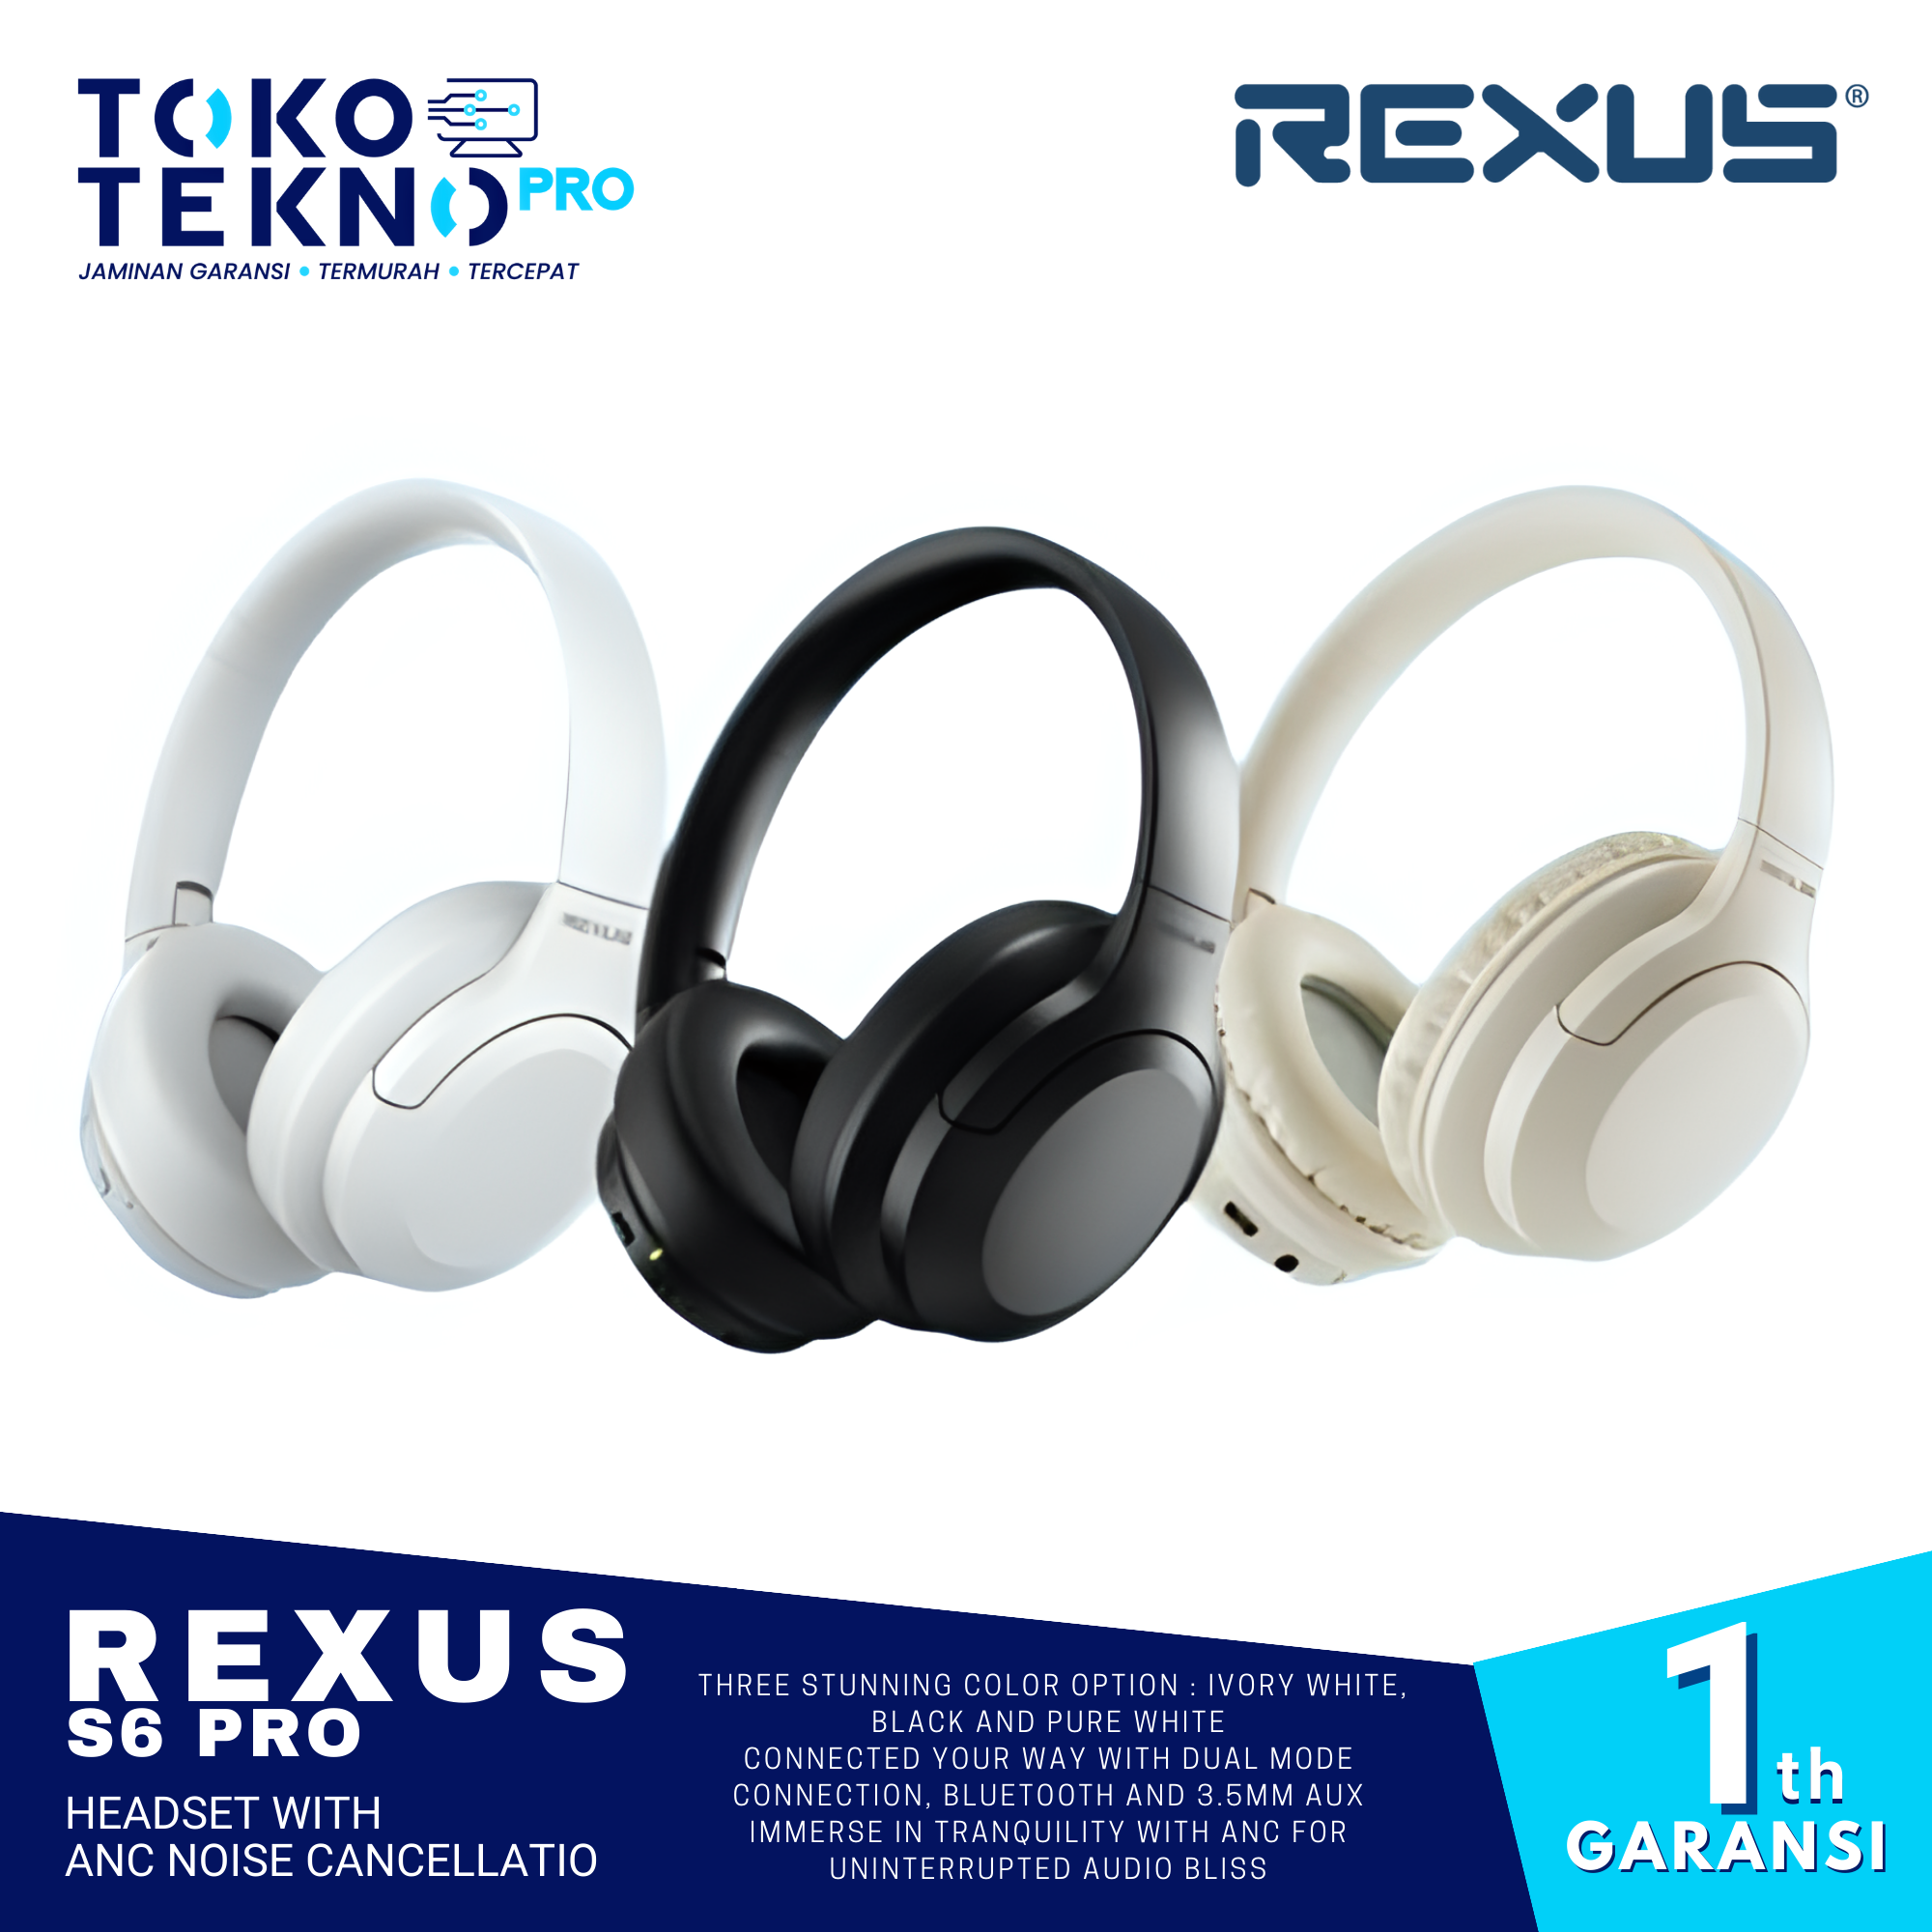 Rexus S6 Pro Wireless Bluetooth Headset With ANC Noise Cancellatio